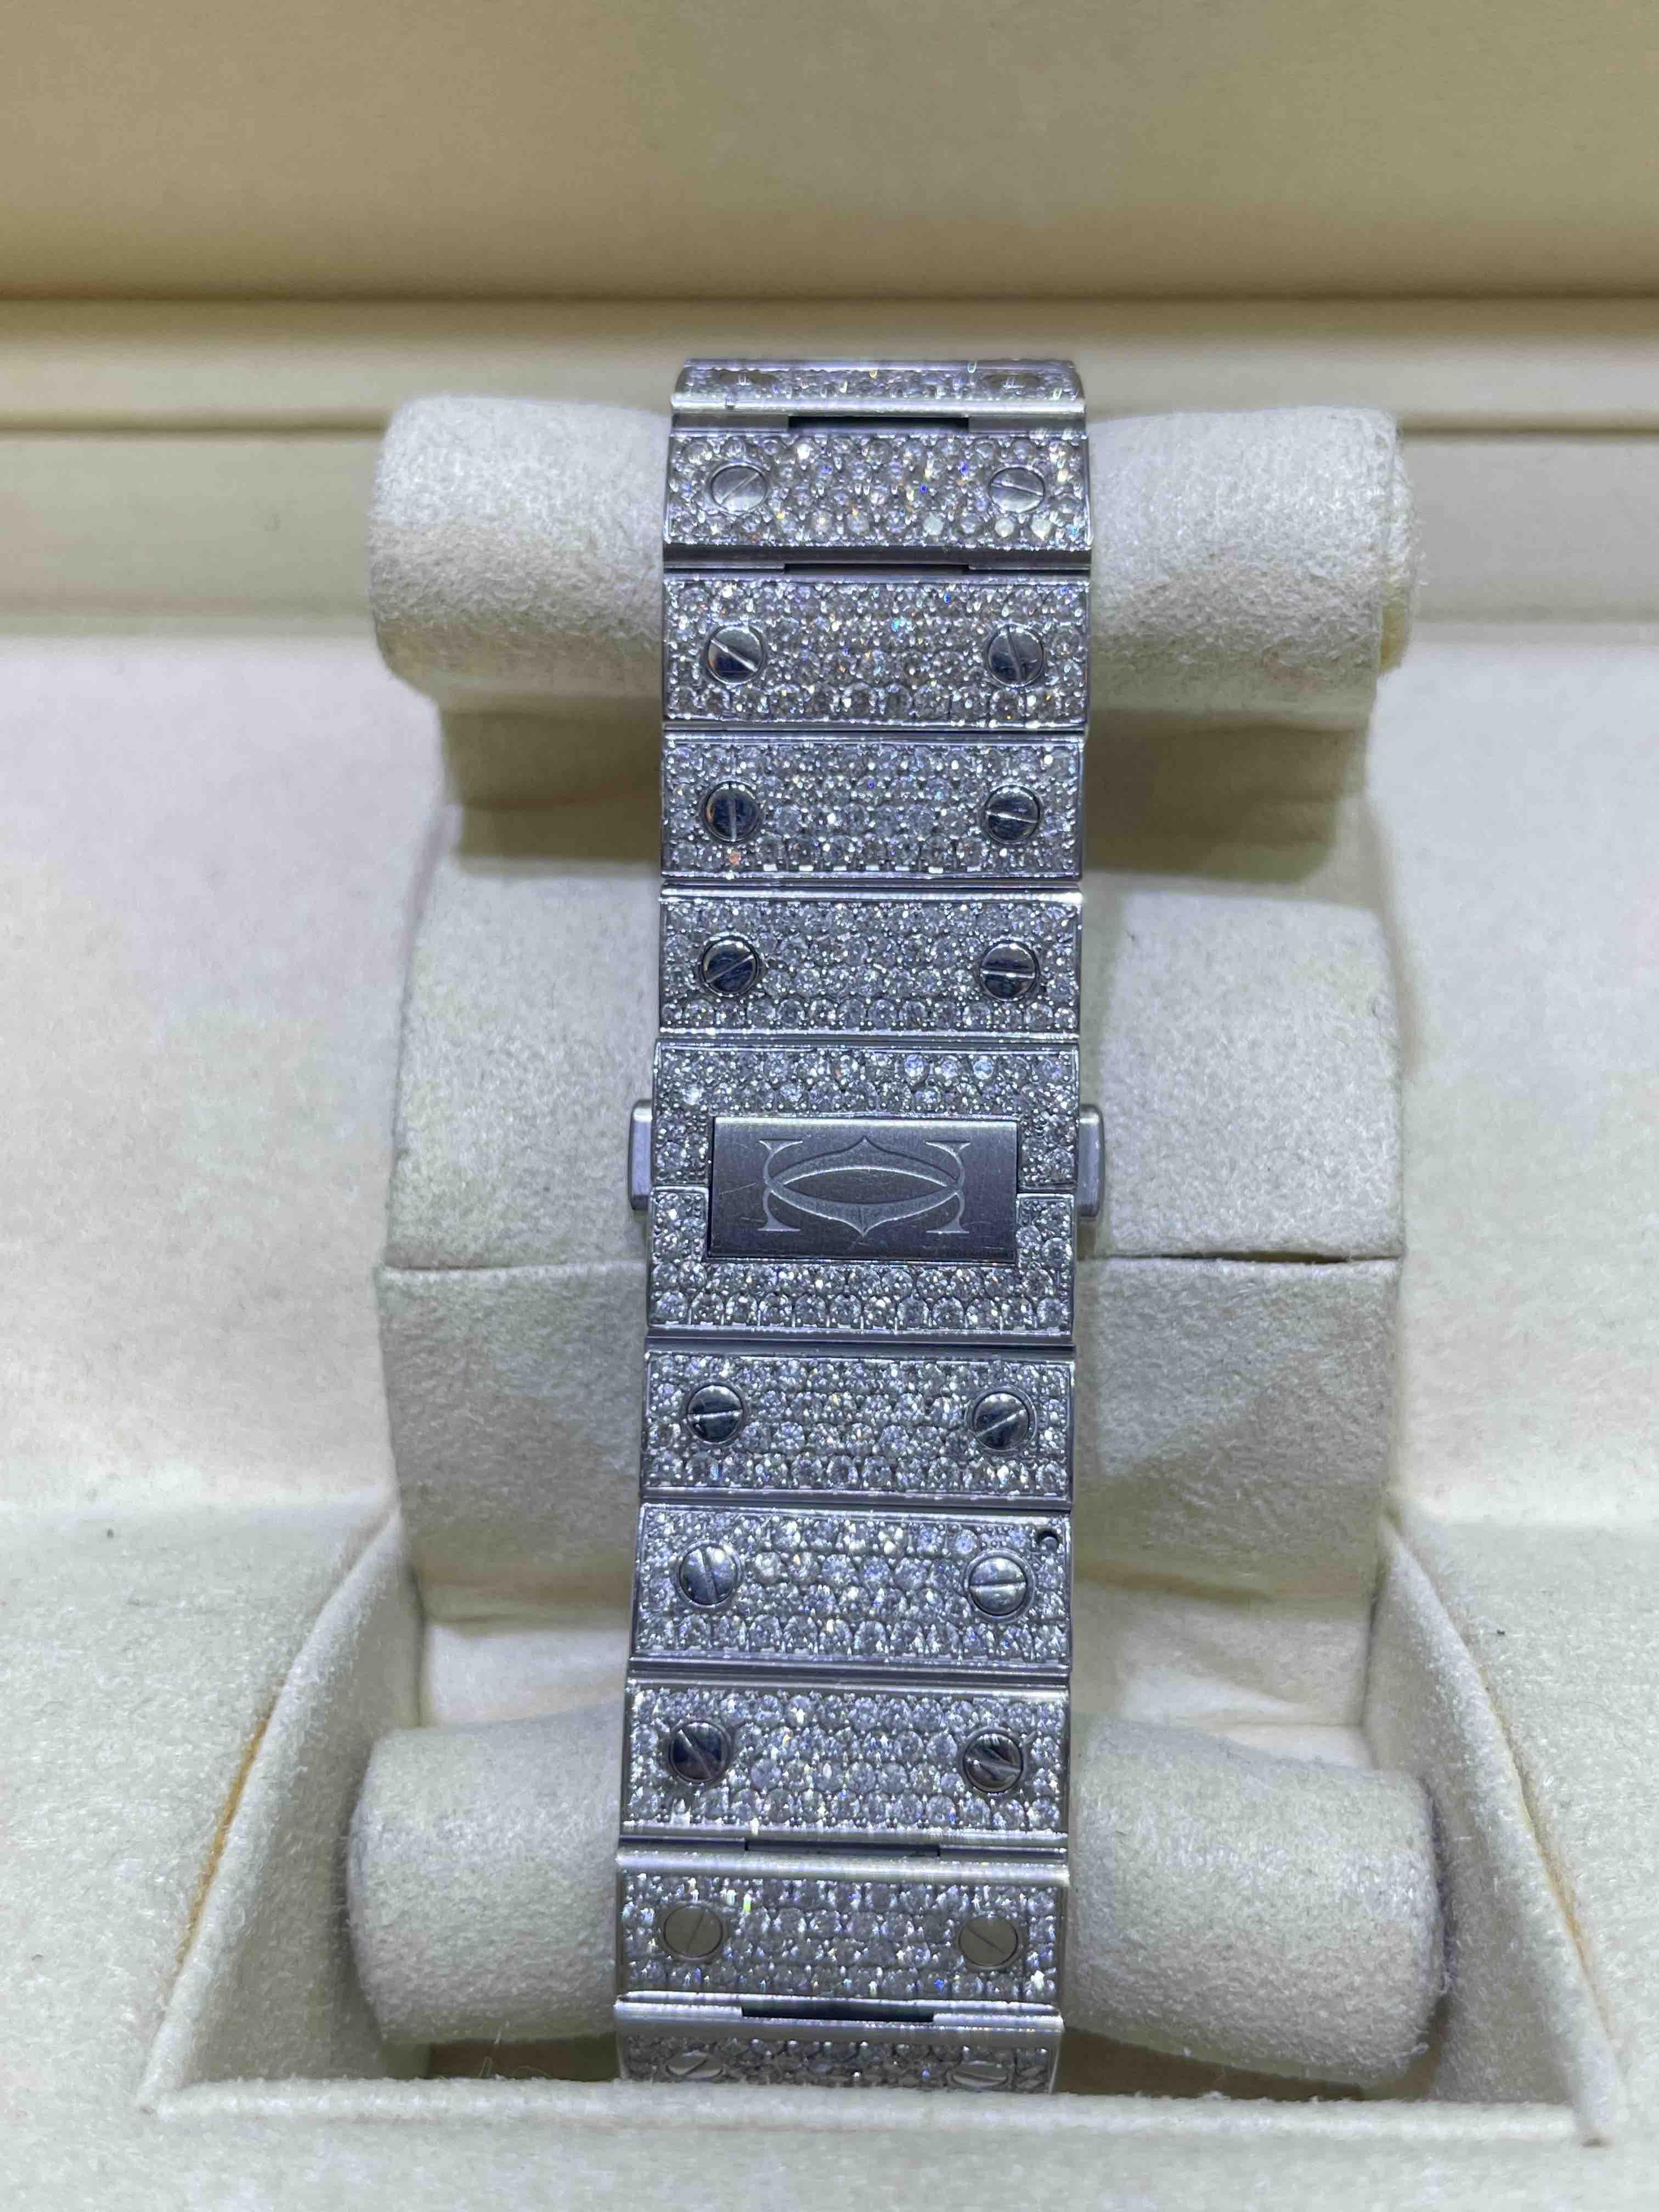 Iced Out Cartier Watch Arabic Dial